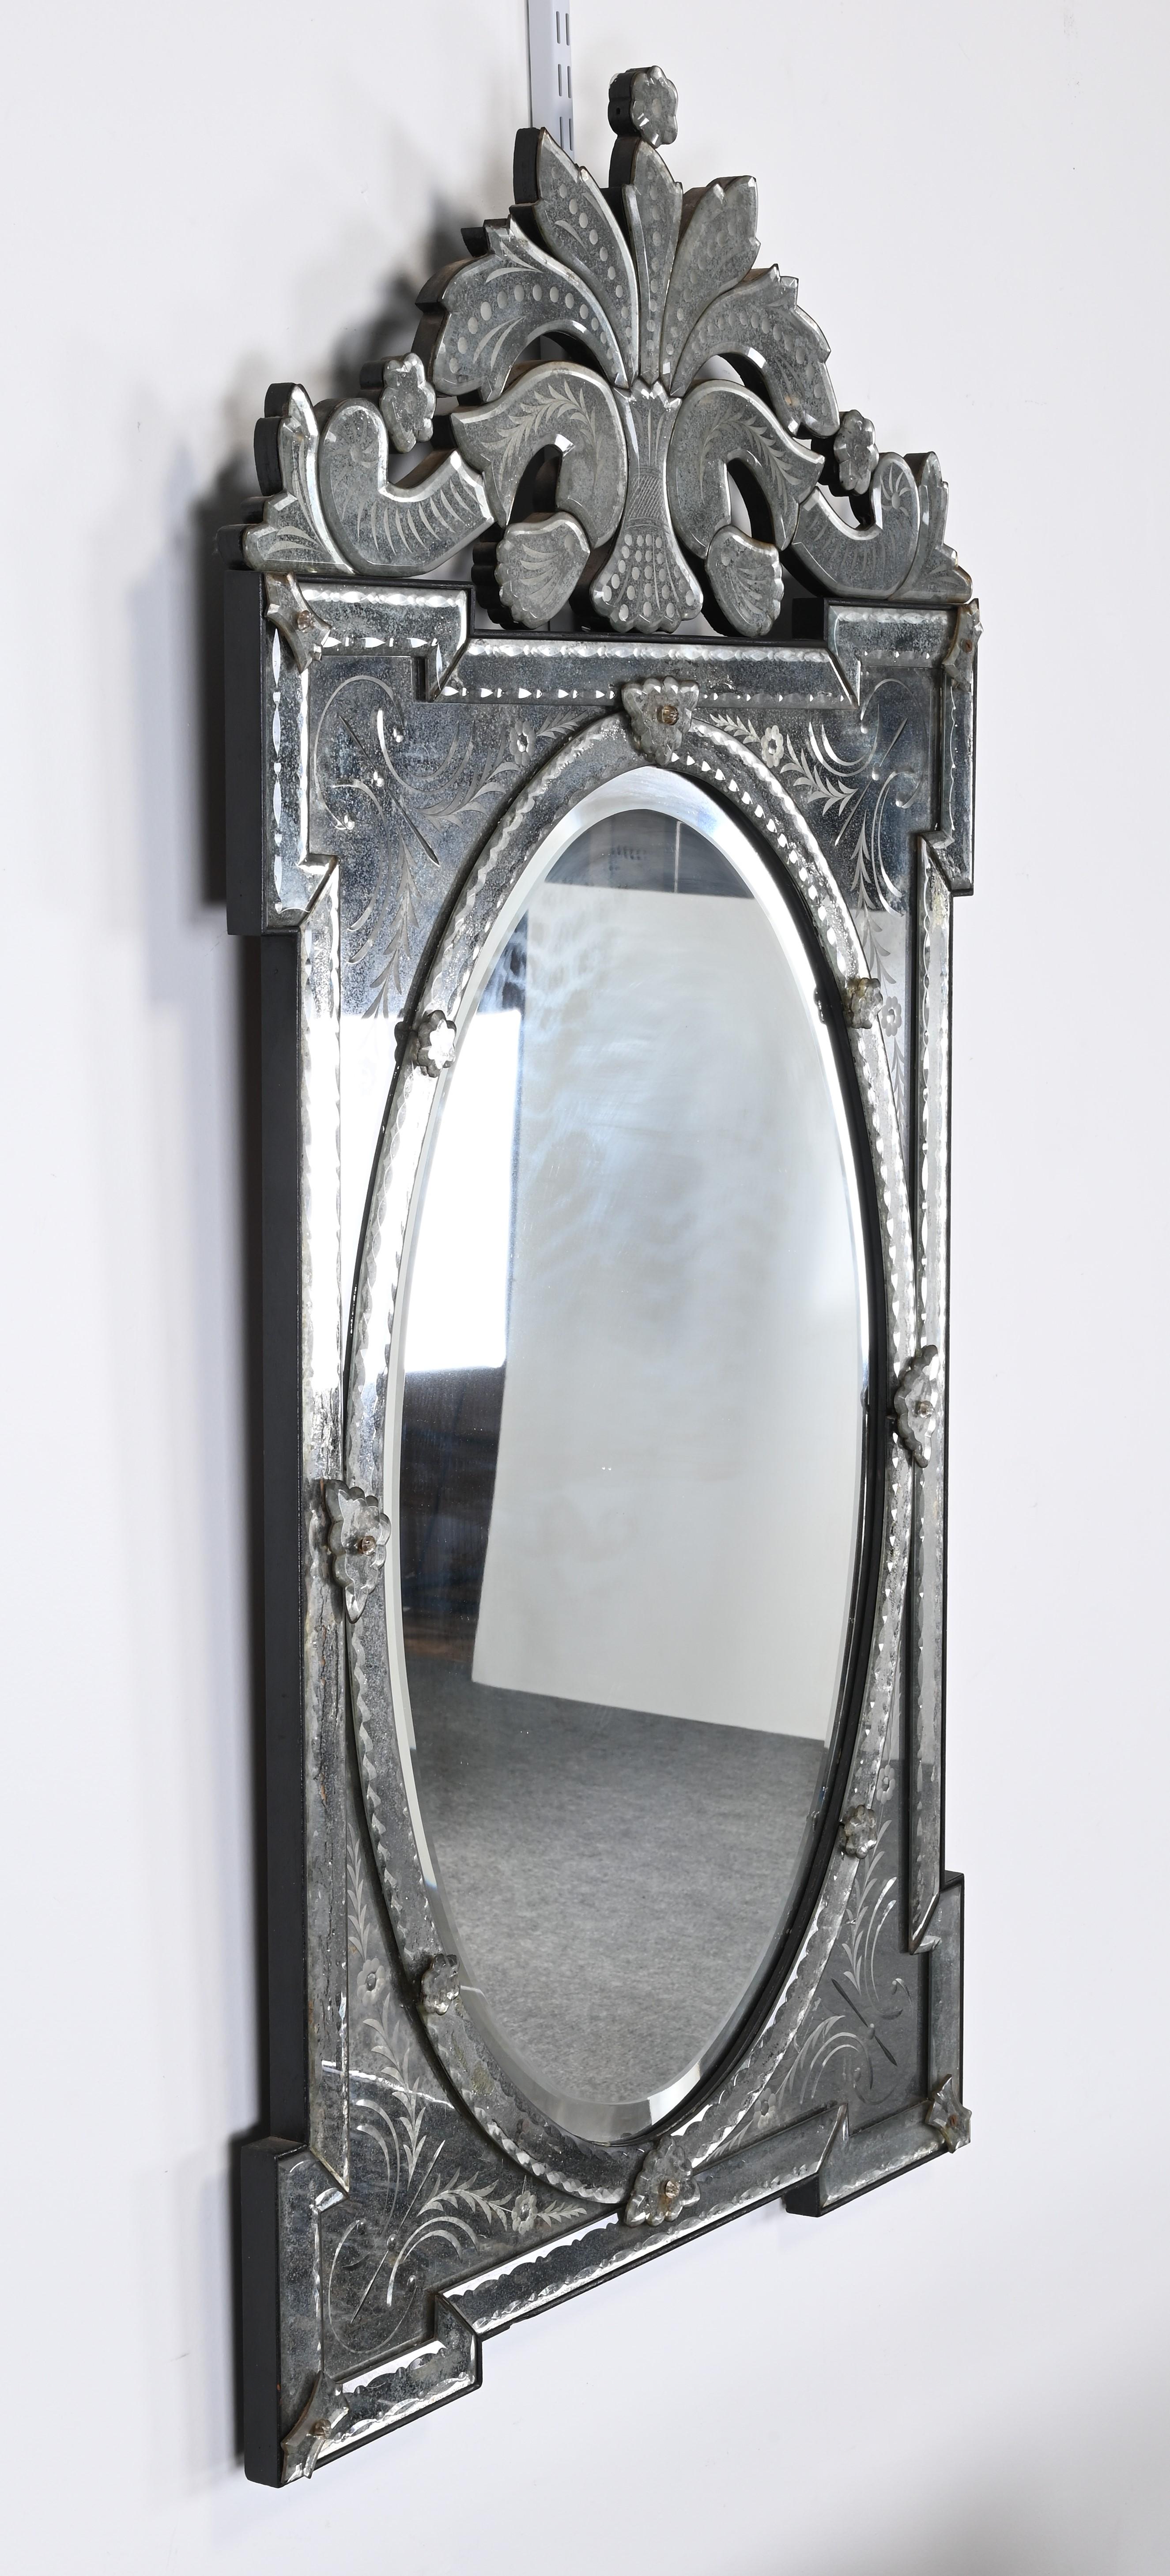 A wonderful antiqued and etched Italian Venetian Wall Mirror, circa 1950-1960. This beautiful vintage mirror would work well with a Hollywood Regency, Traditional, or even a Contemporary setting. The intricate mirror has great scale and presence